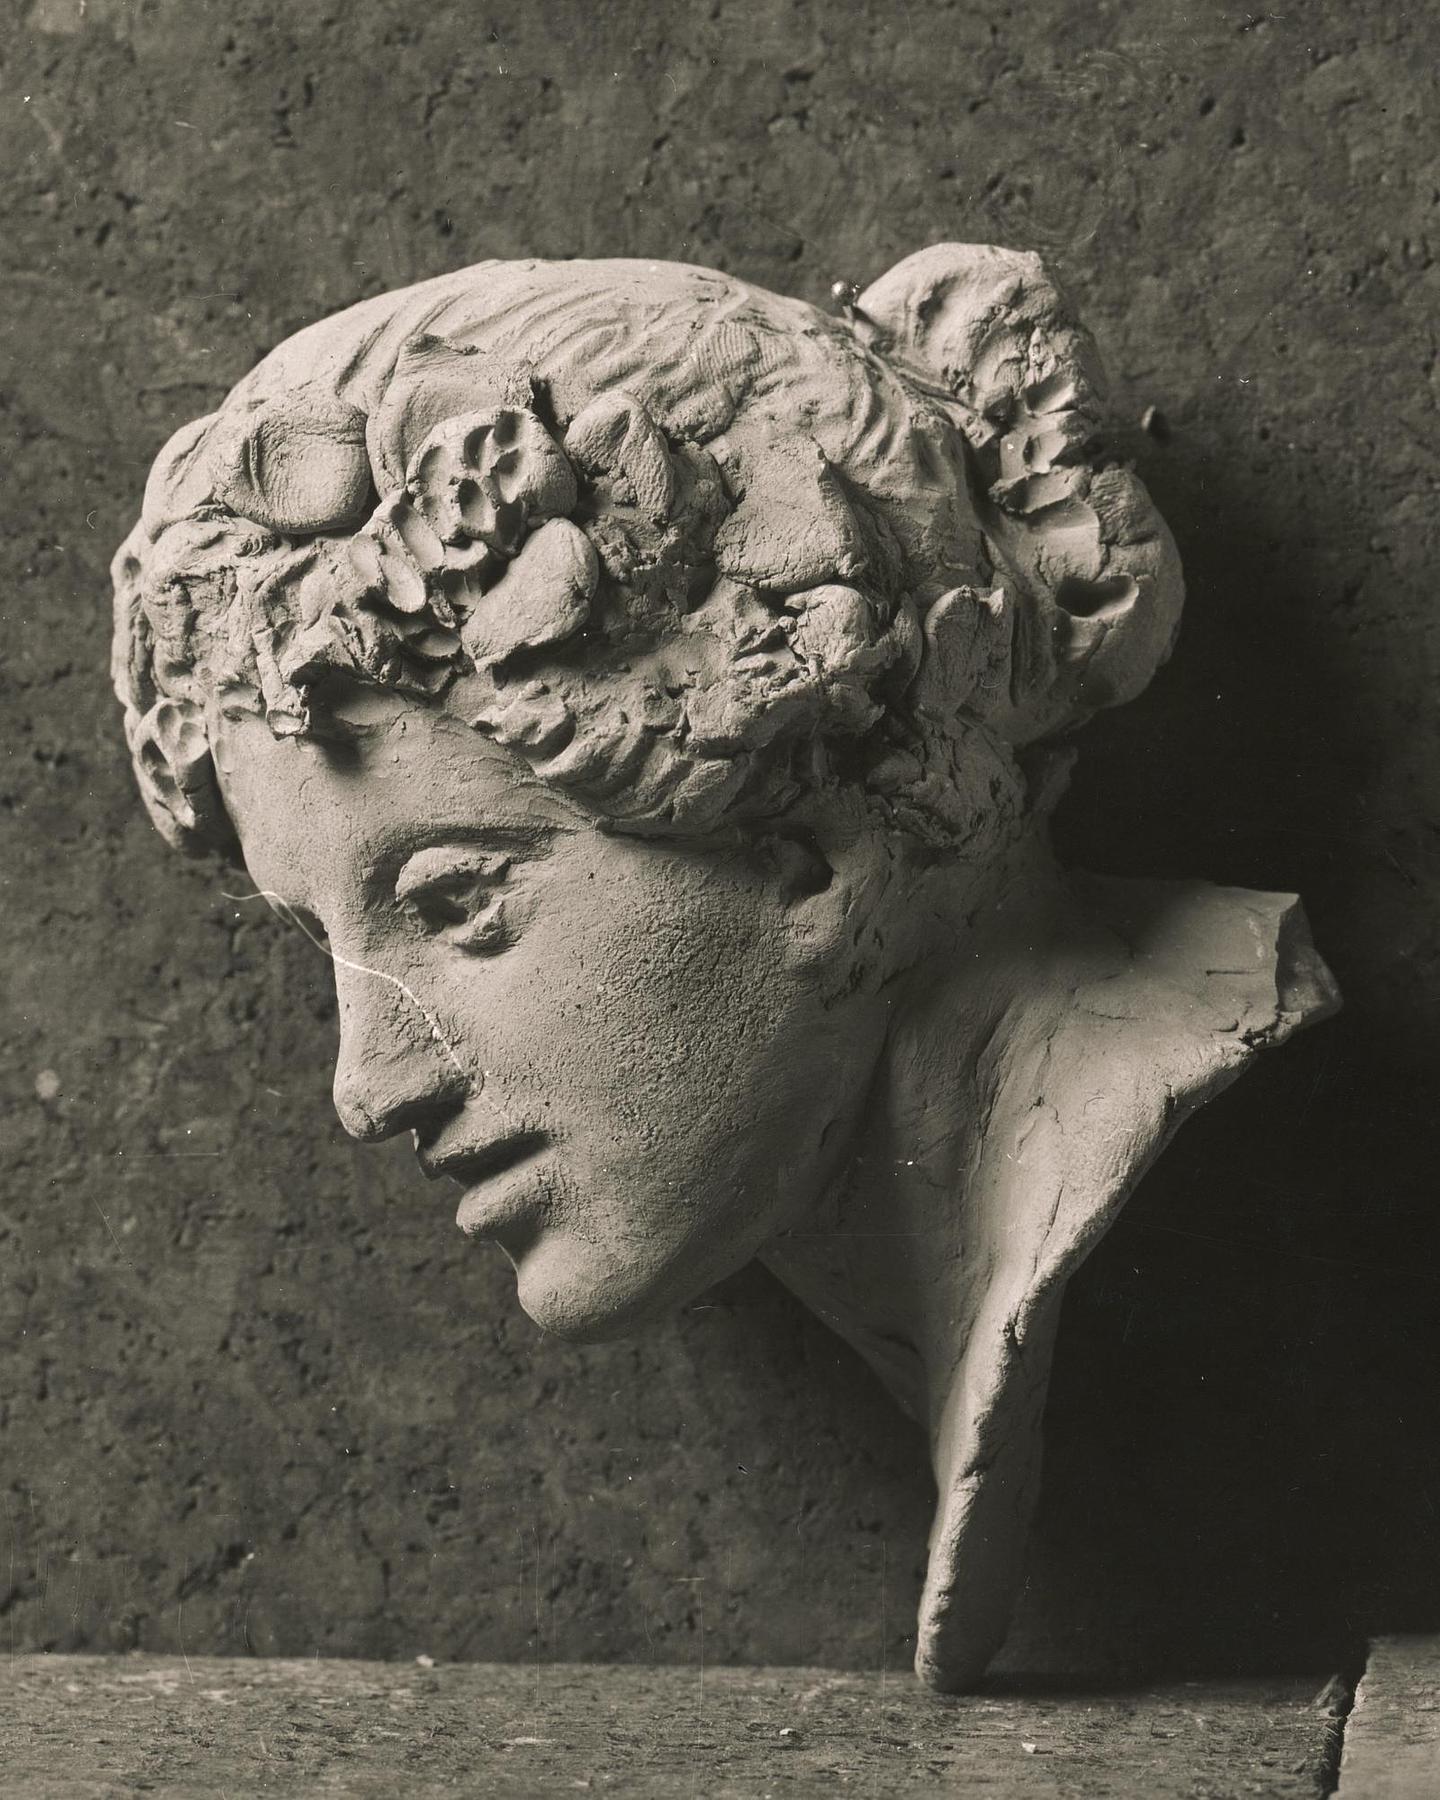 Head of the Muse of Comedy, Nysø88